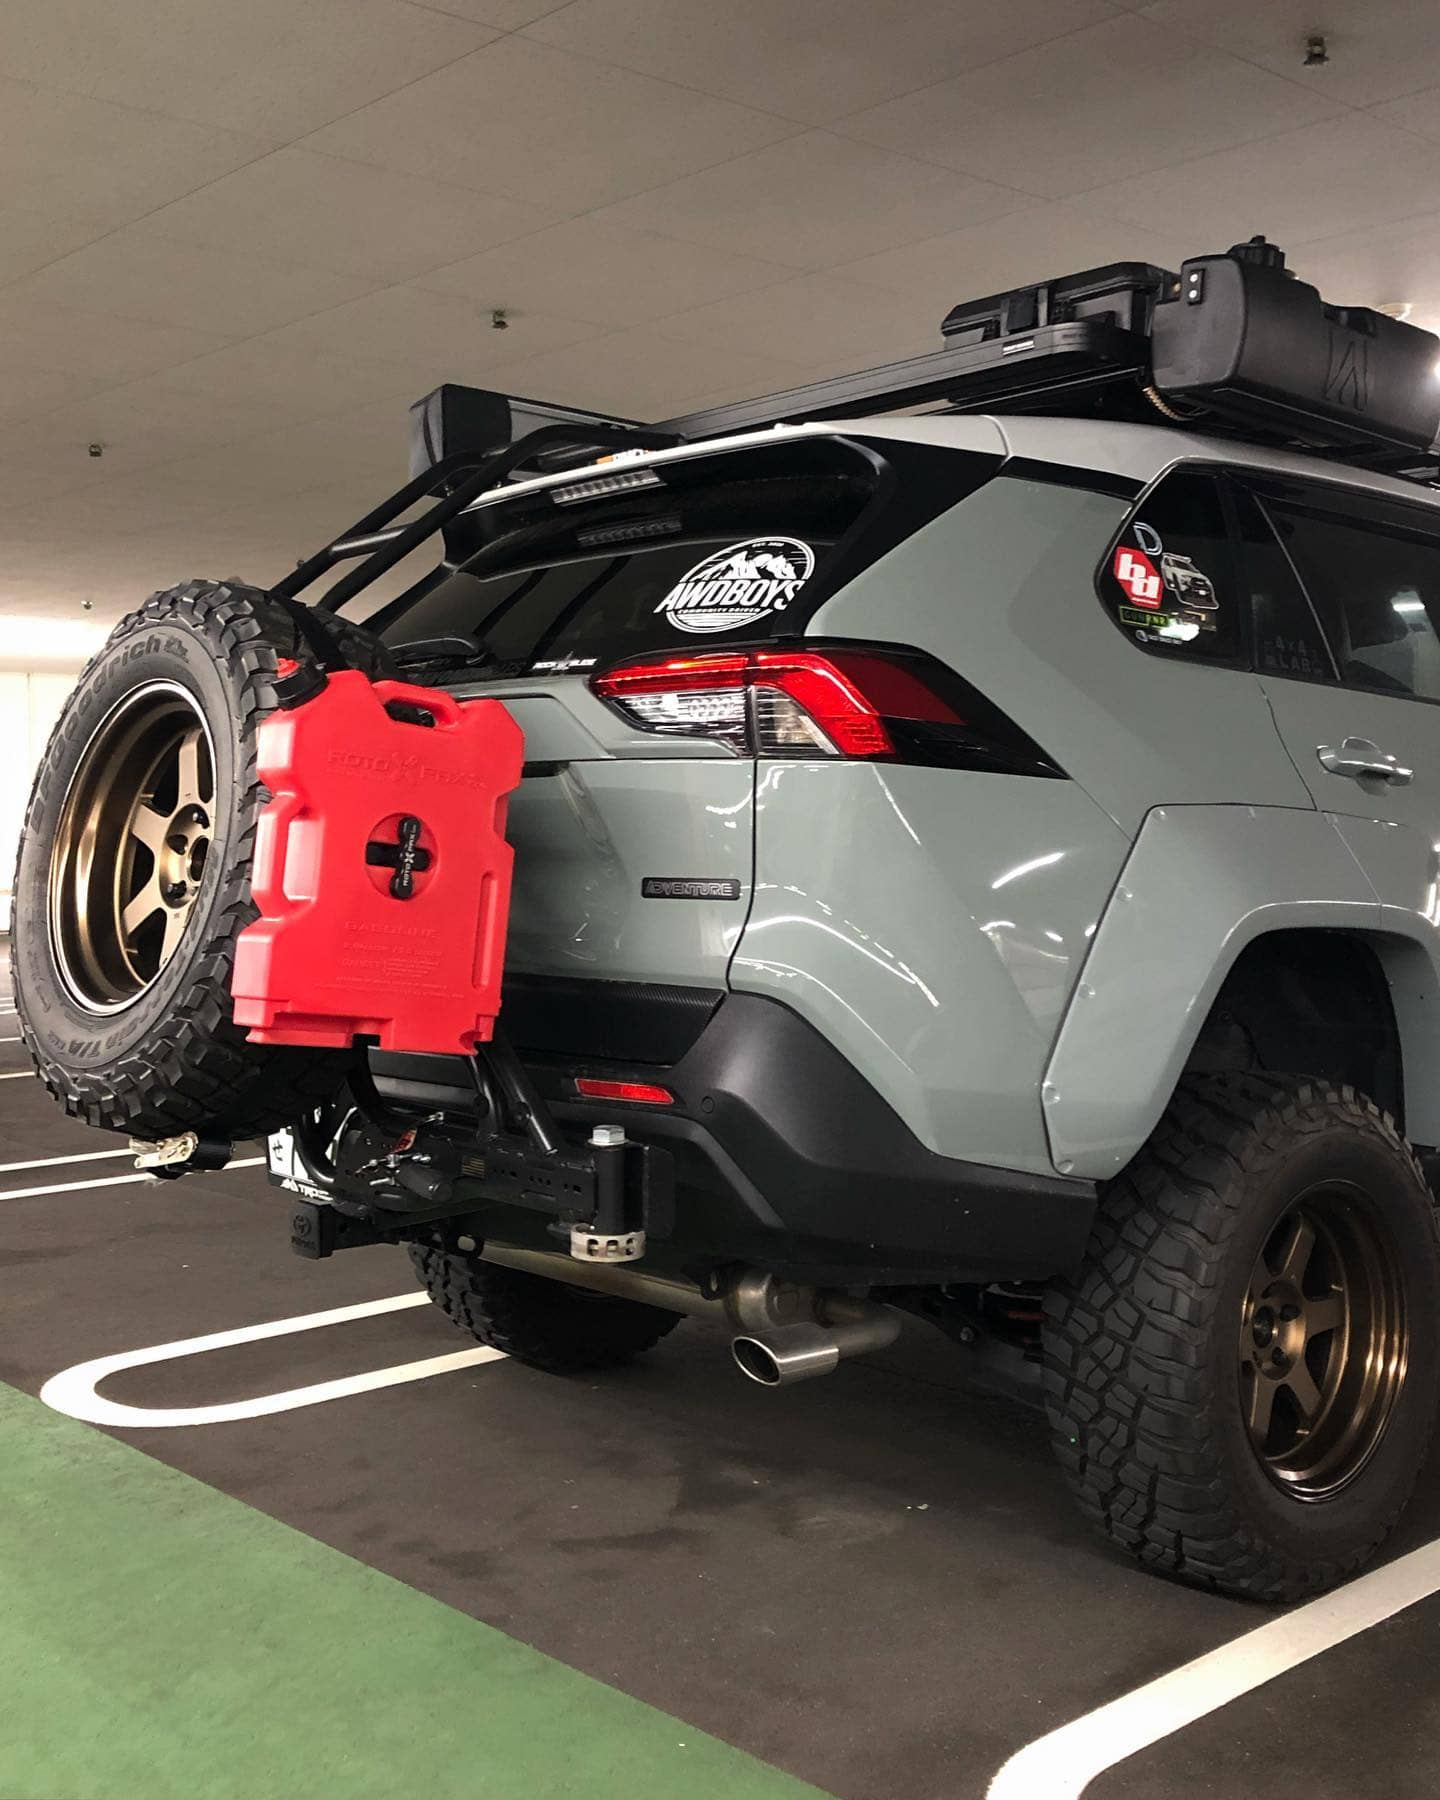 Toyota Rav4 with off-road mods and upgrades